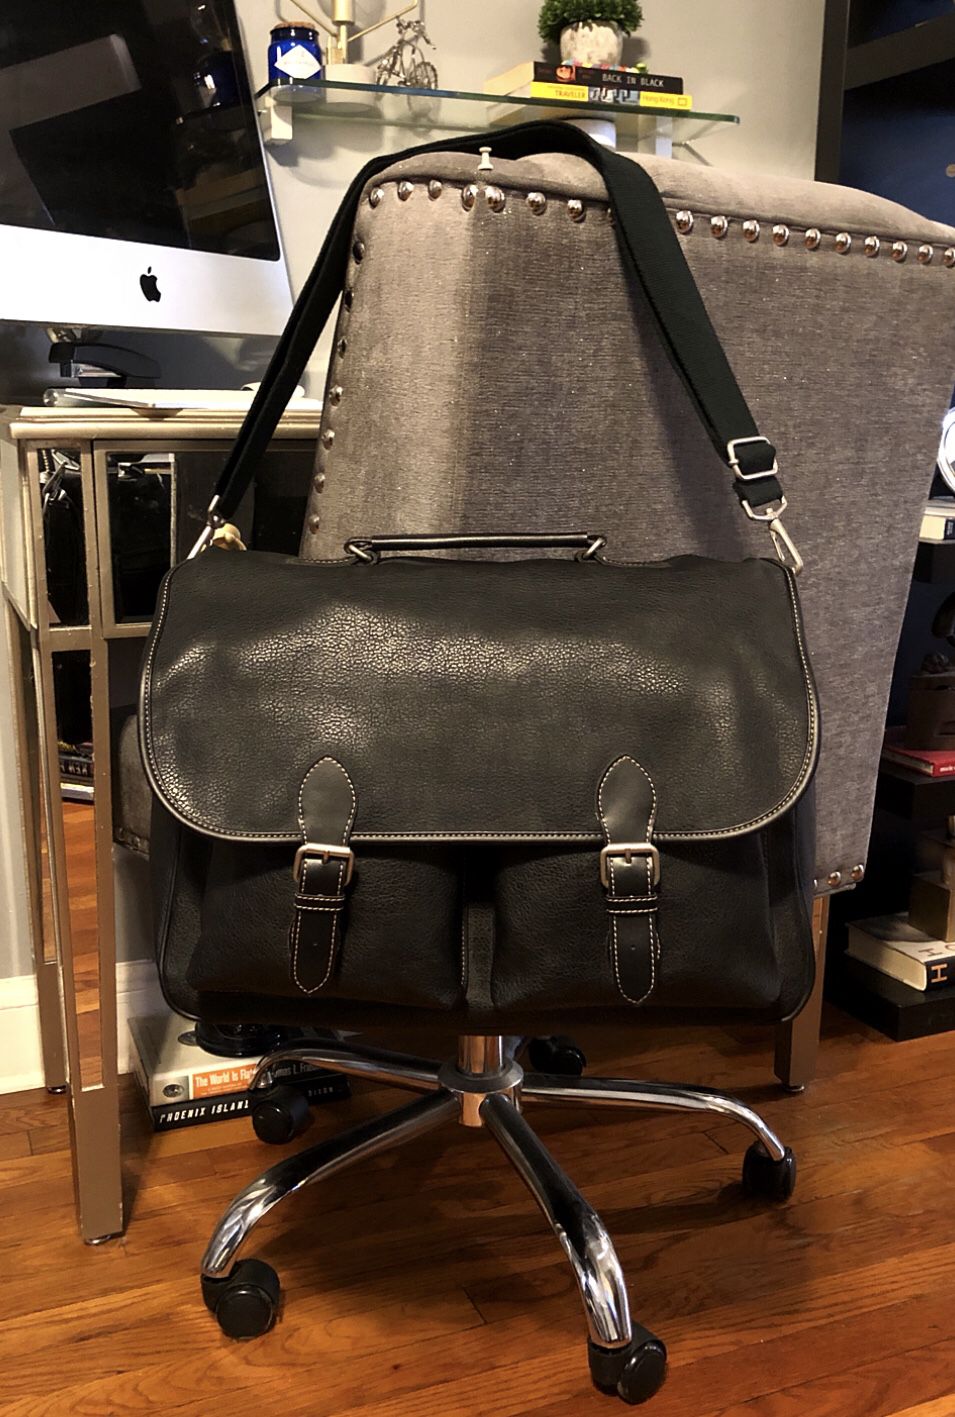 New! Men’s GAP messenger bag paid $48 Brand-new never worn large size leather messenger bag with adjustable strap and lots of great storage space!